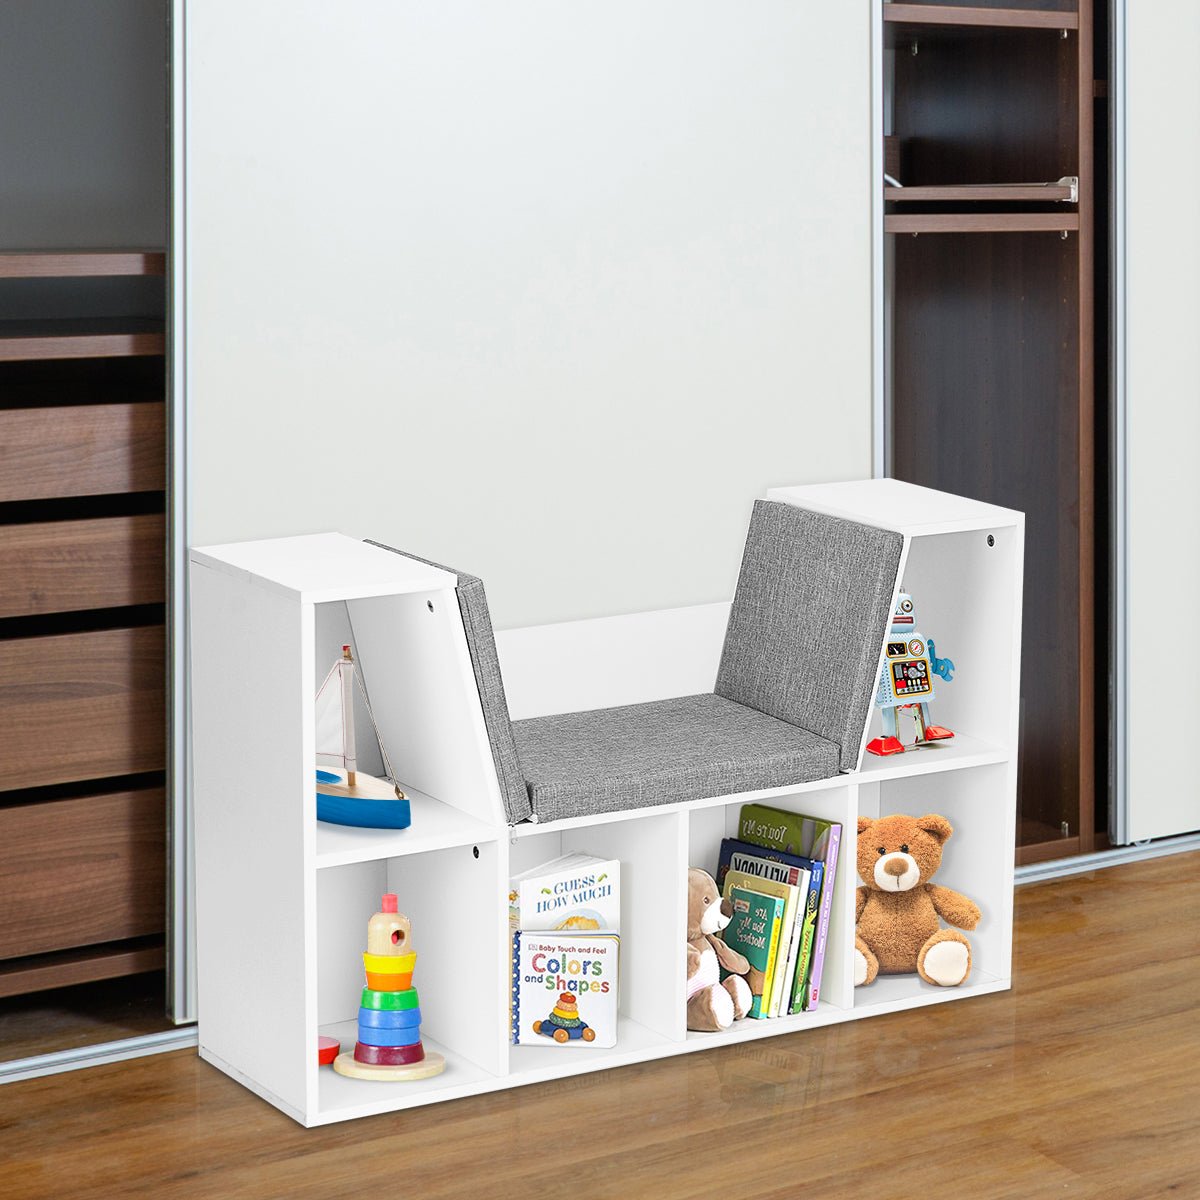 Kid's Wood Toy Cubbies - Storage Organizer with 5 Drawers, Smart Solution